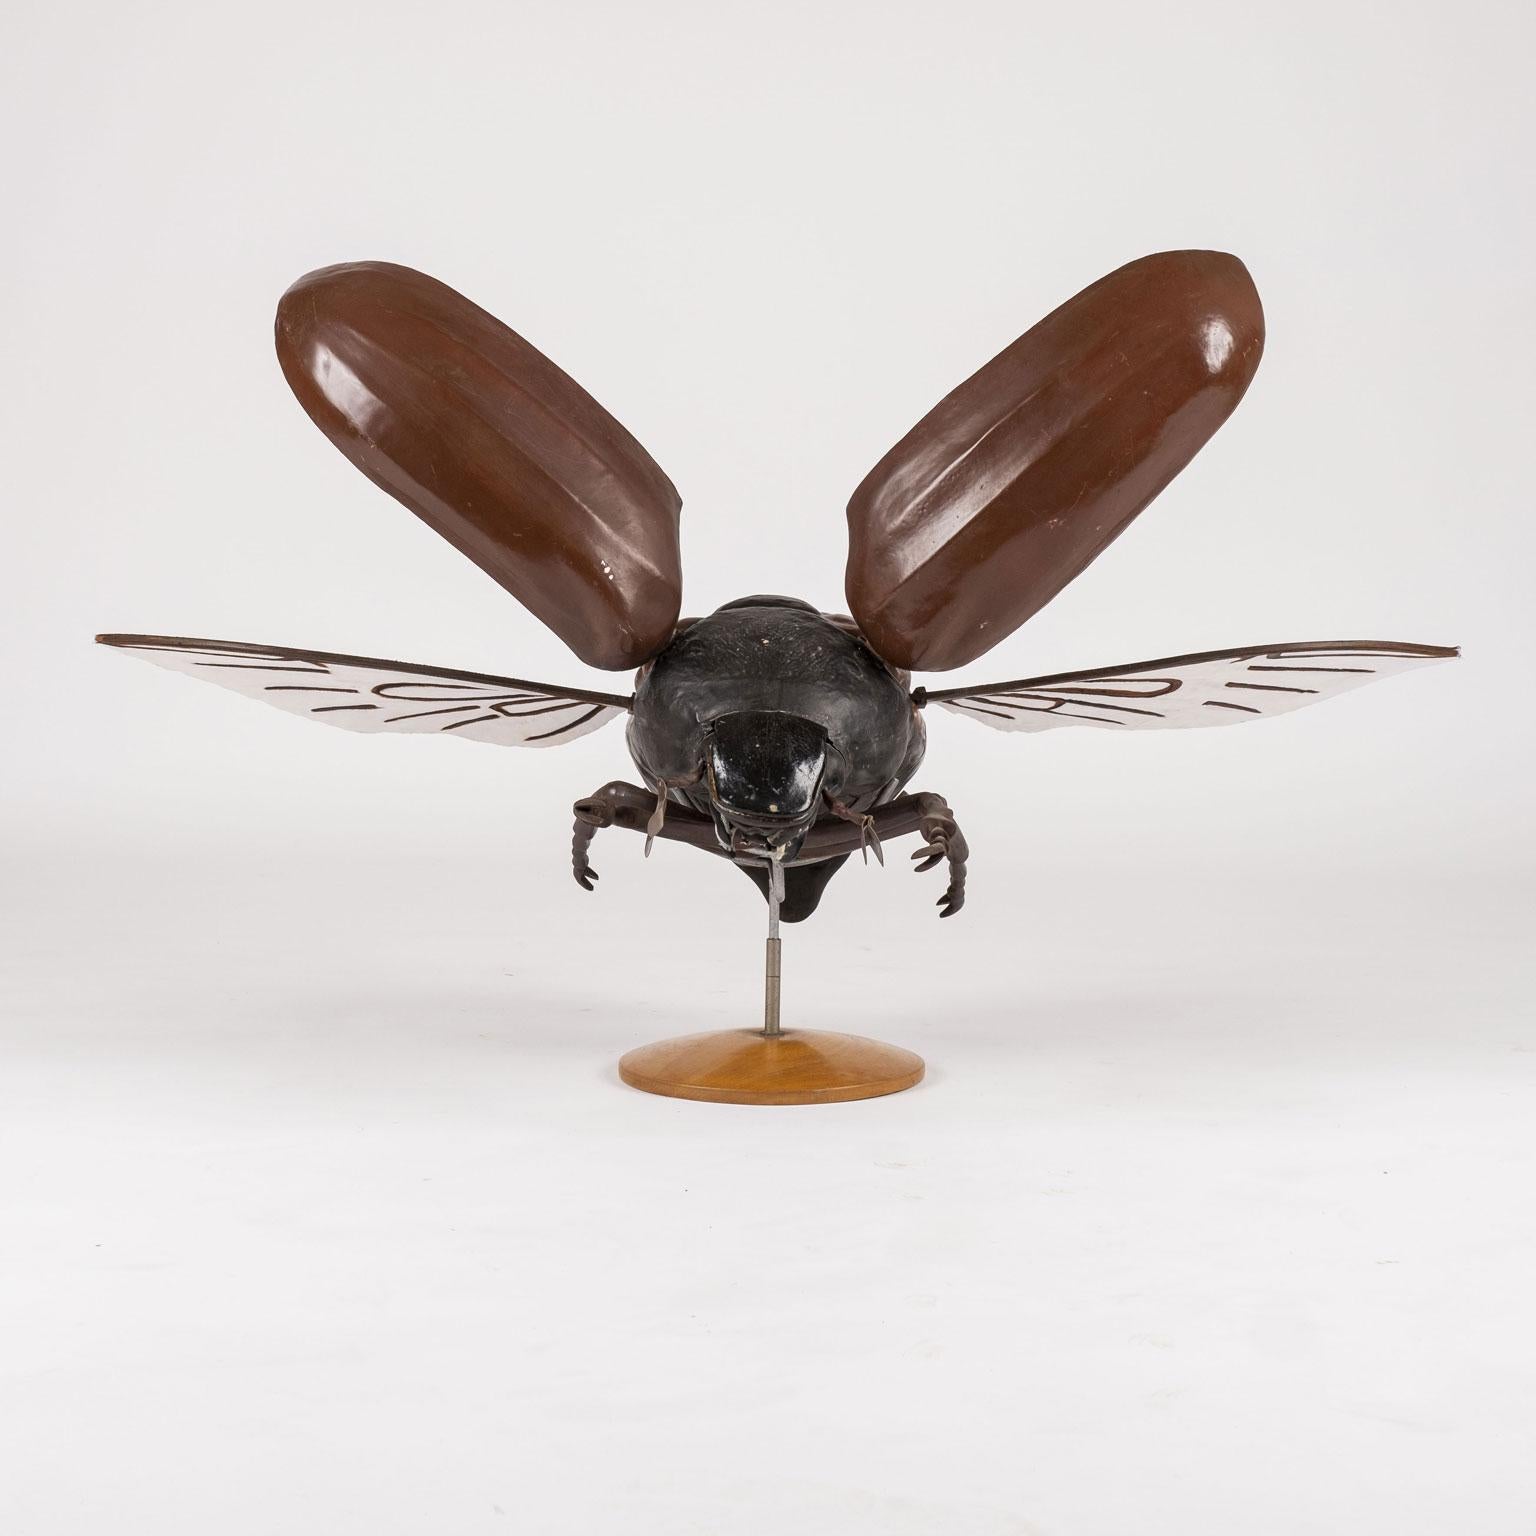 Large sculpture of beetle in flight, this is a large cut-away model (on the original base) of a beetle used for anatomical instruction in a Prague, (circa 1950-1959). Model is hand-crafted from papier-mâché and carved wood. Completely hand-painted